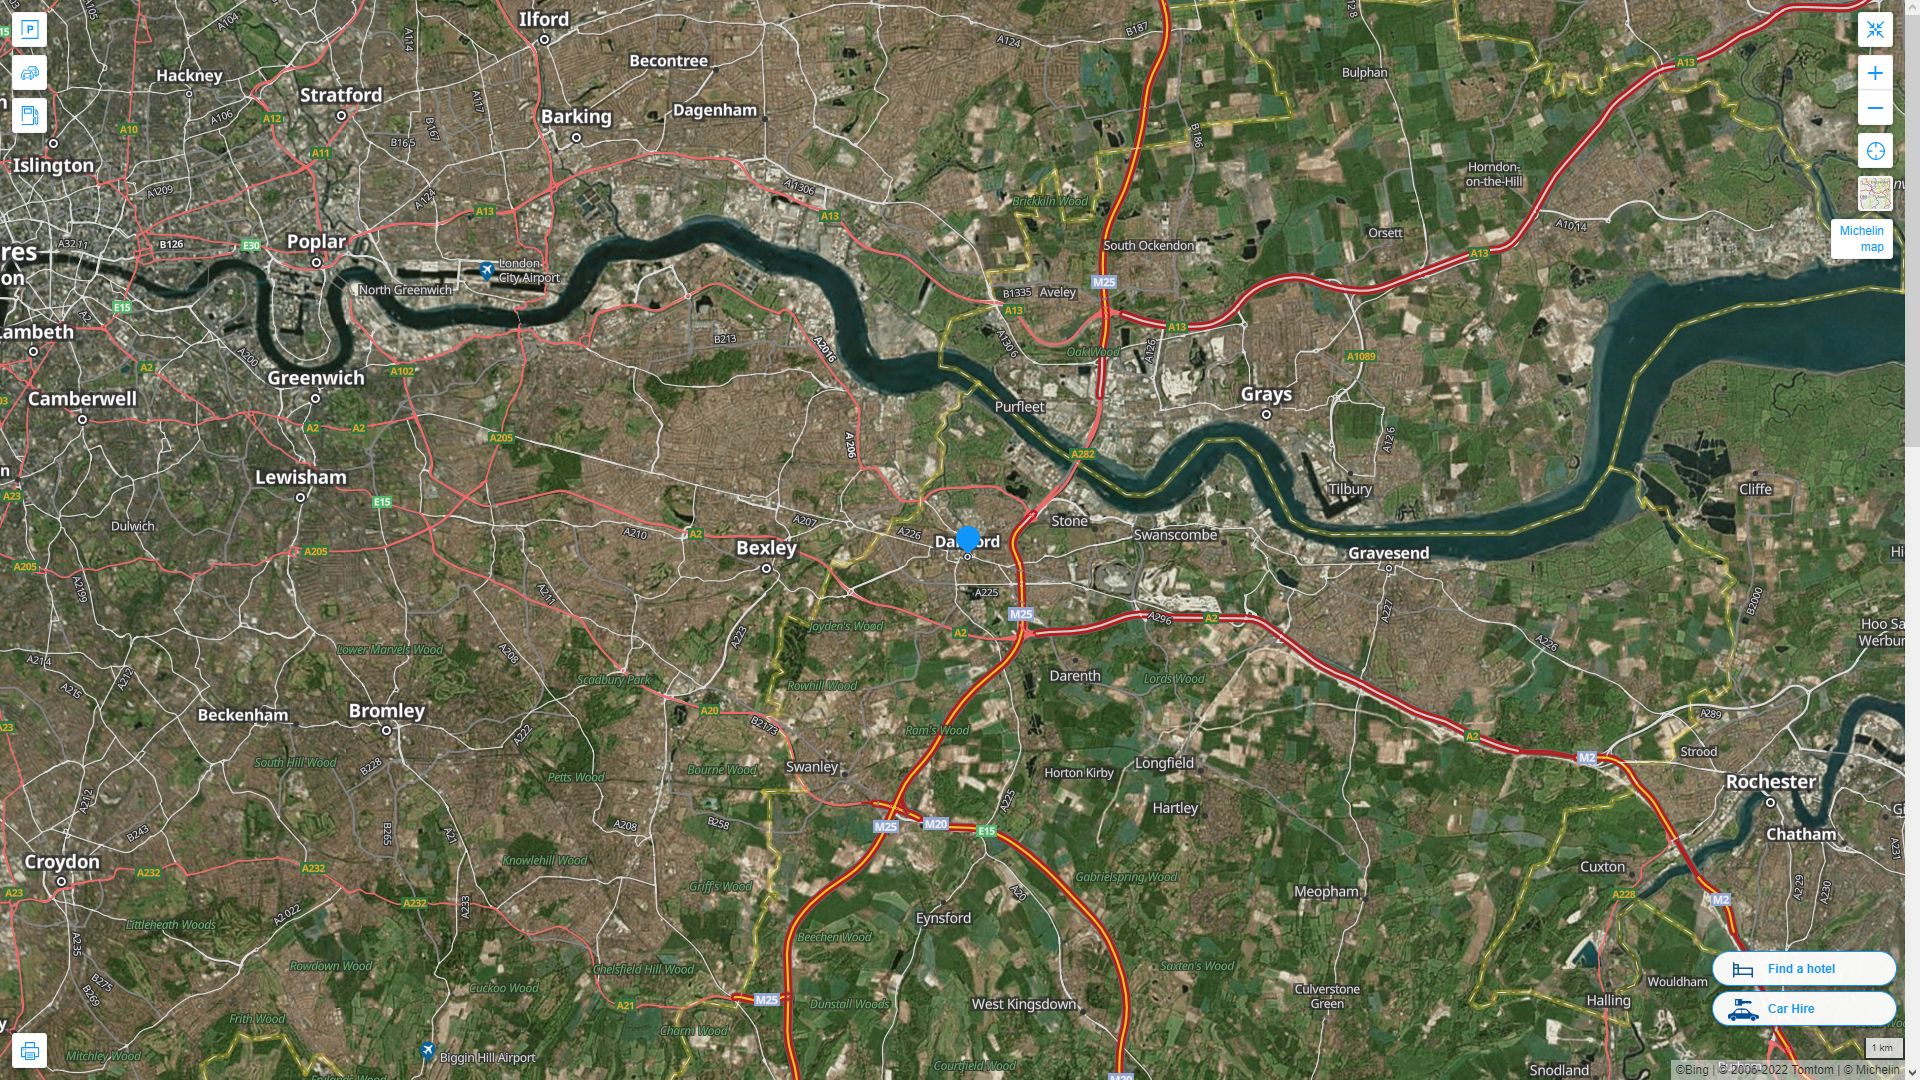 Dartford Highway and Road Map with Satellite View